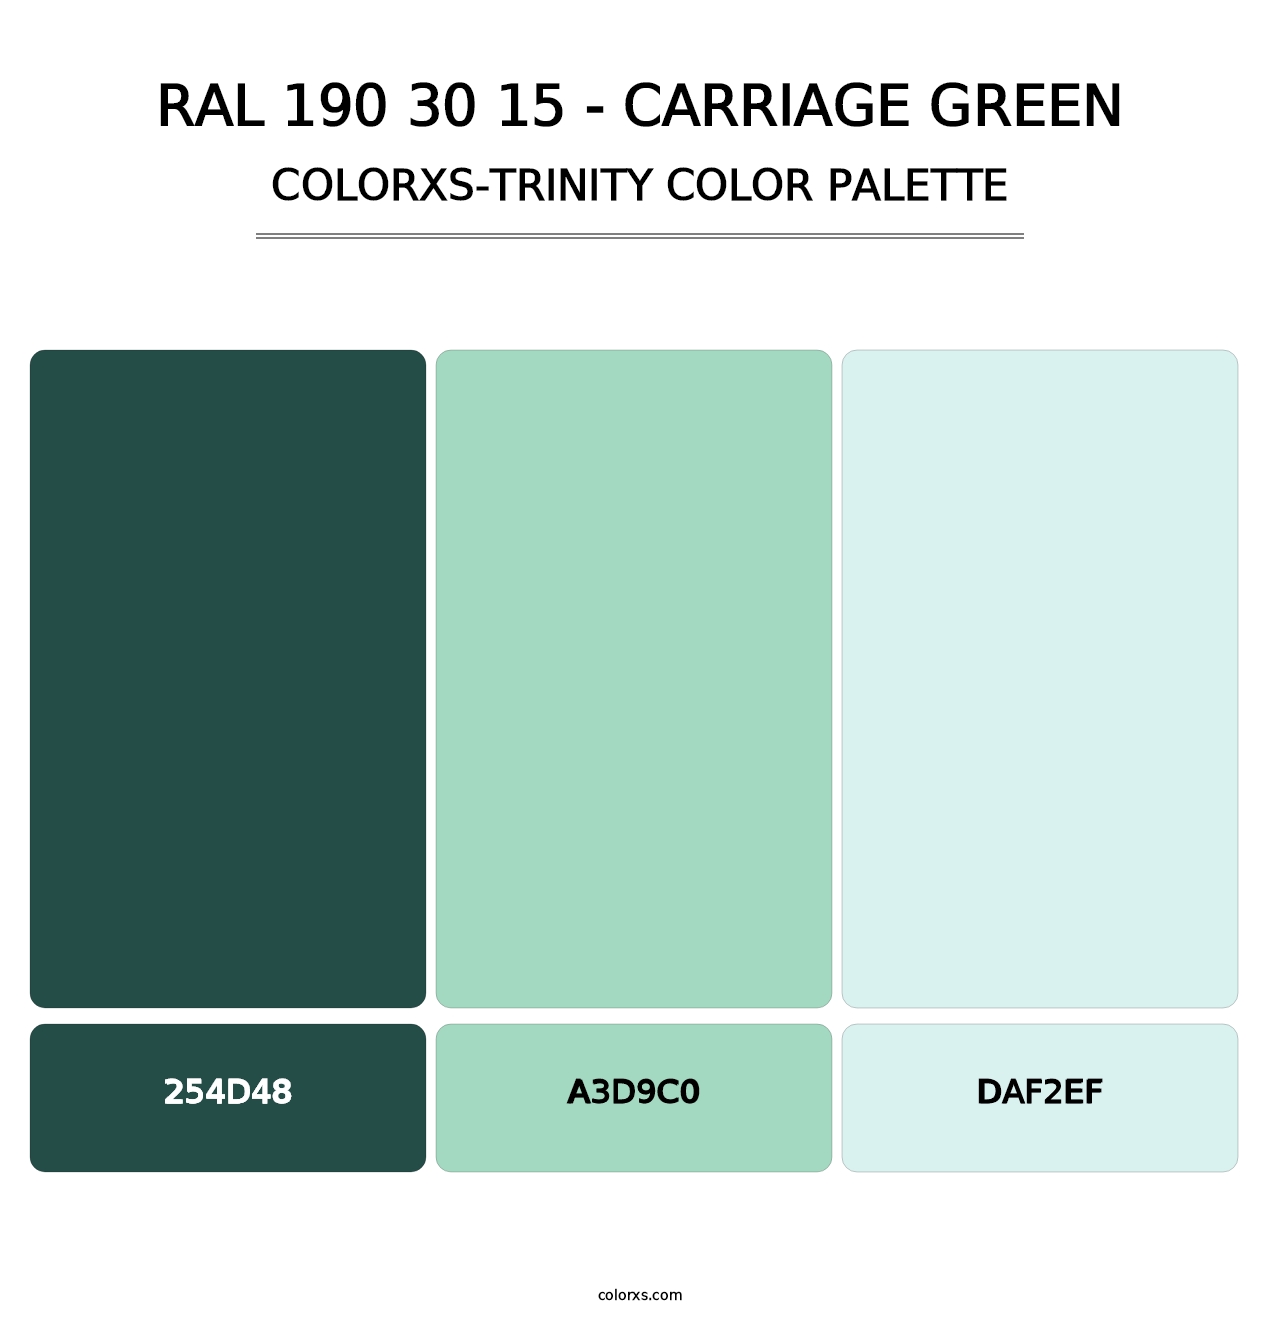 RAL 190 30 15 - Carriage Green - Colorxs Trinity Palette